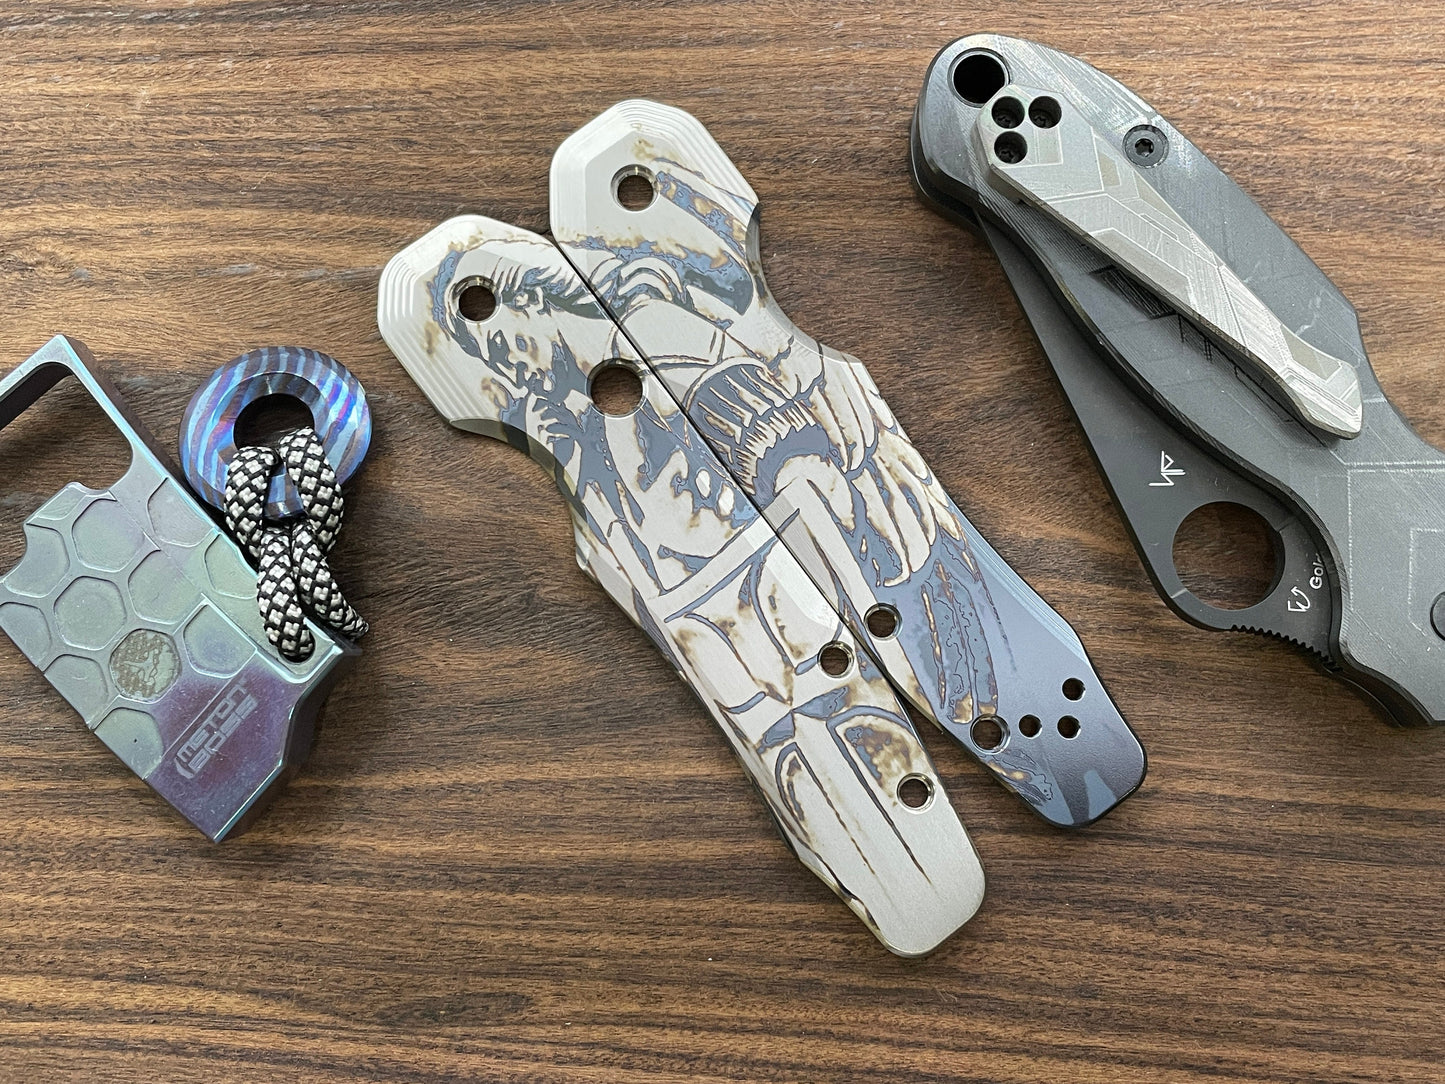 St. MICHAEL the Archangel Titanium Scales for Spyderco SMOCK